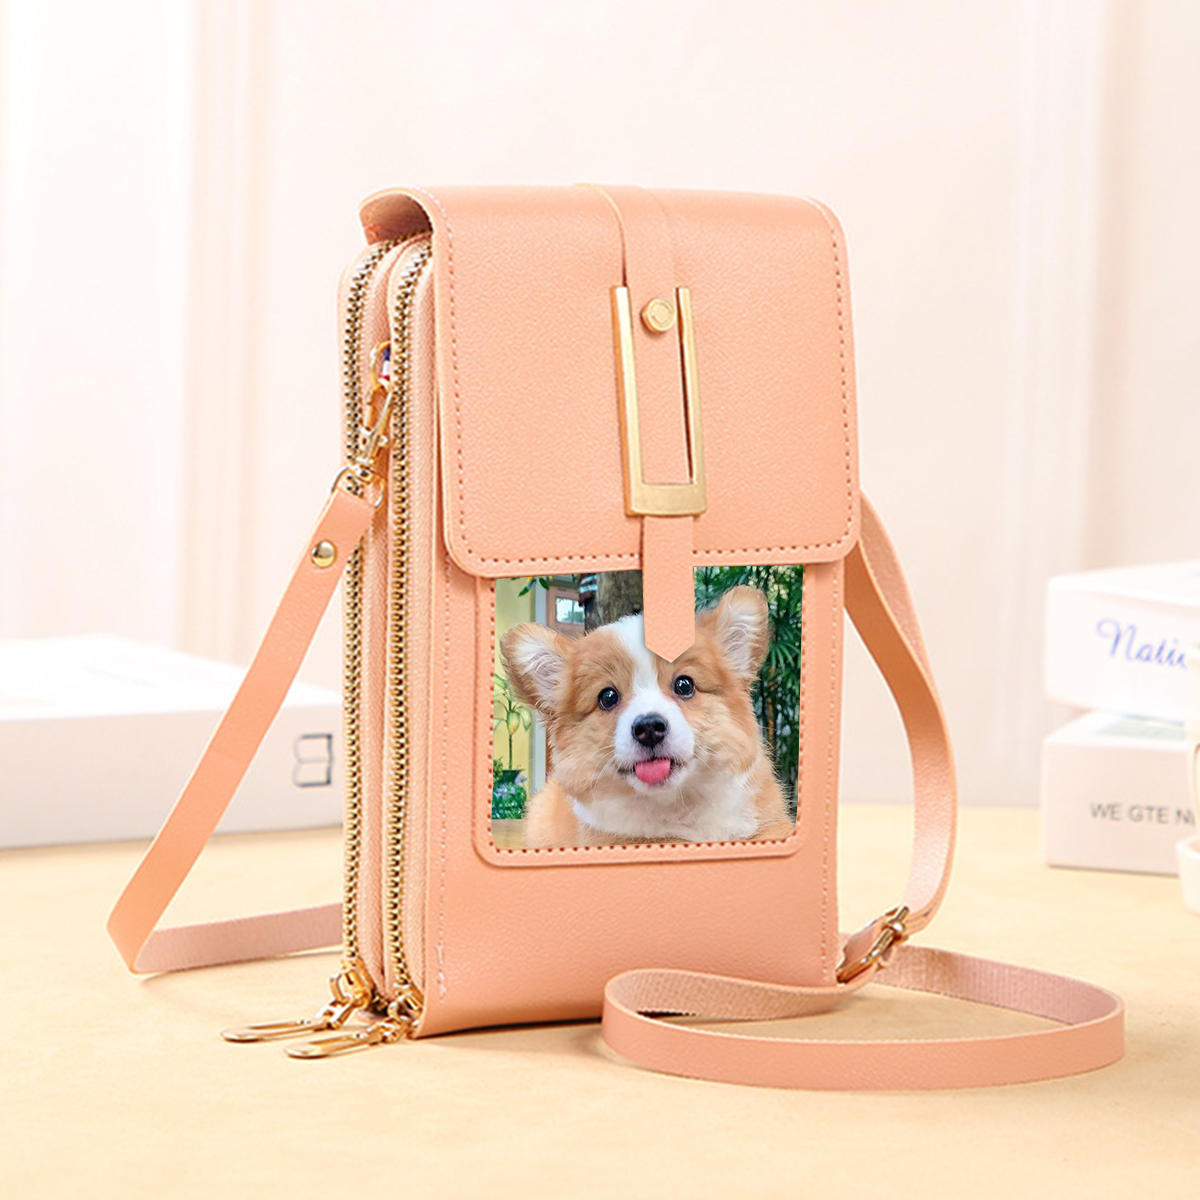 Personalized With Your Pet's Photo - Peach